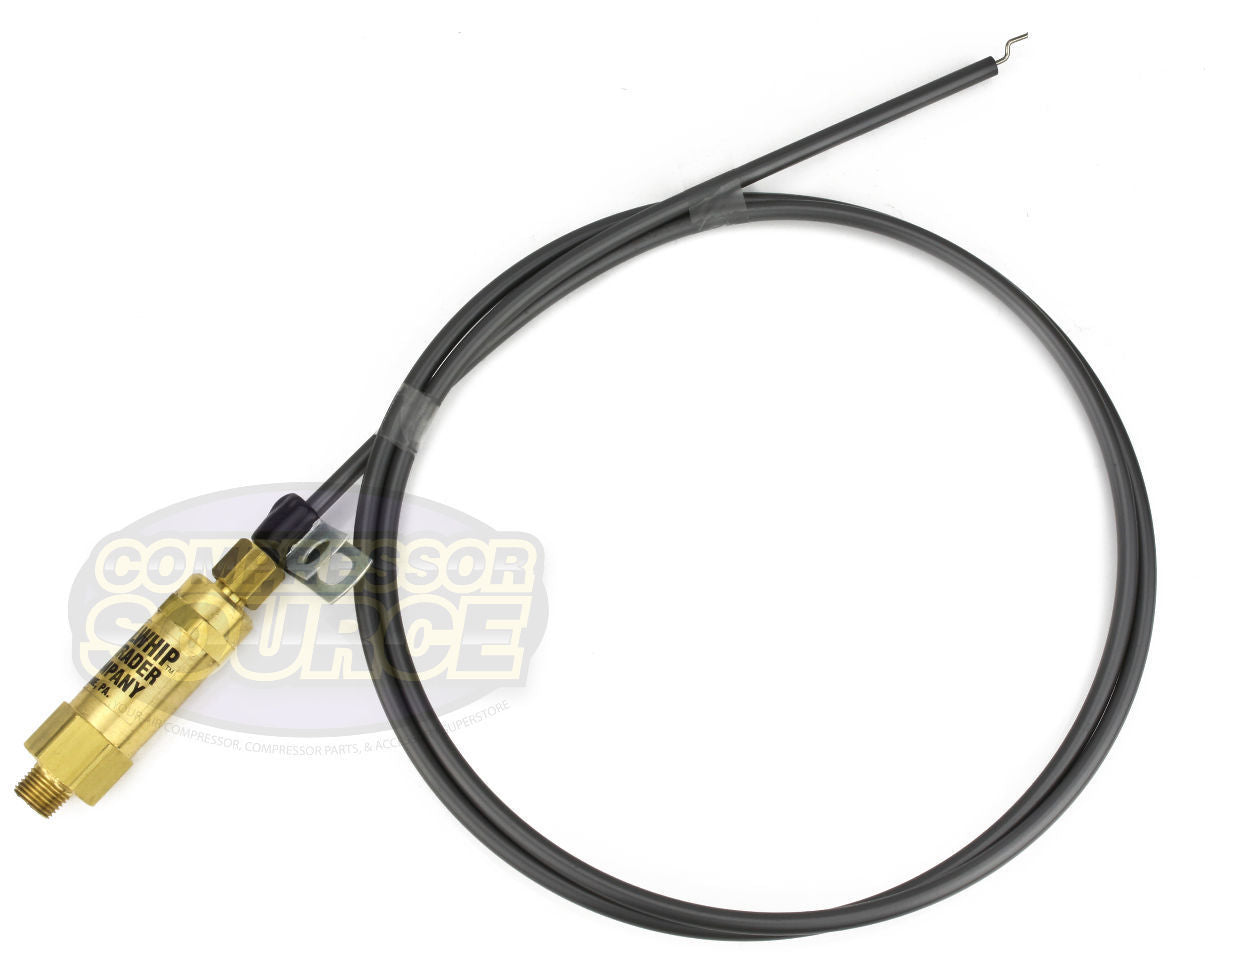 36" Inch Bullwhip Throttle Control Cable For Gas Air Compressors